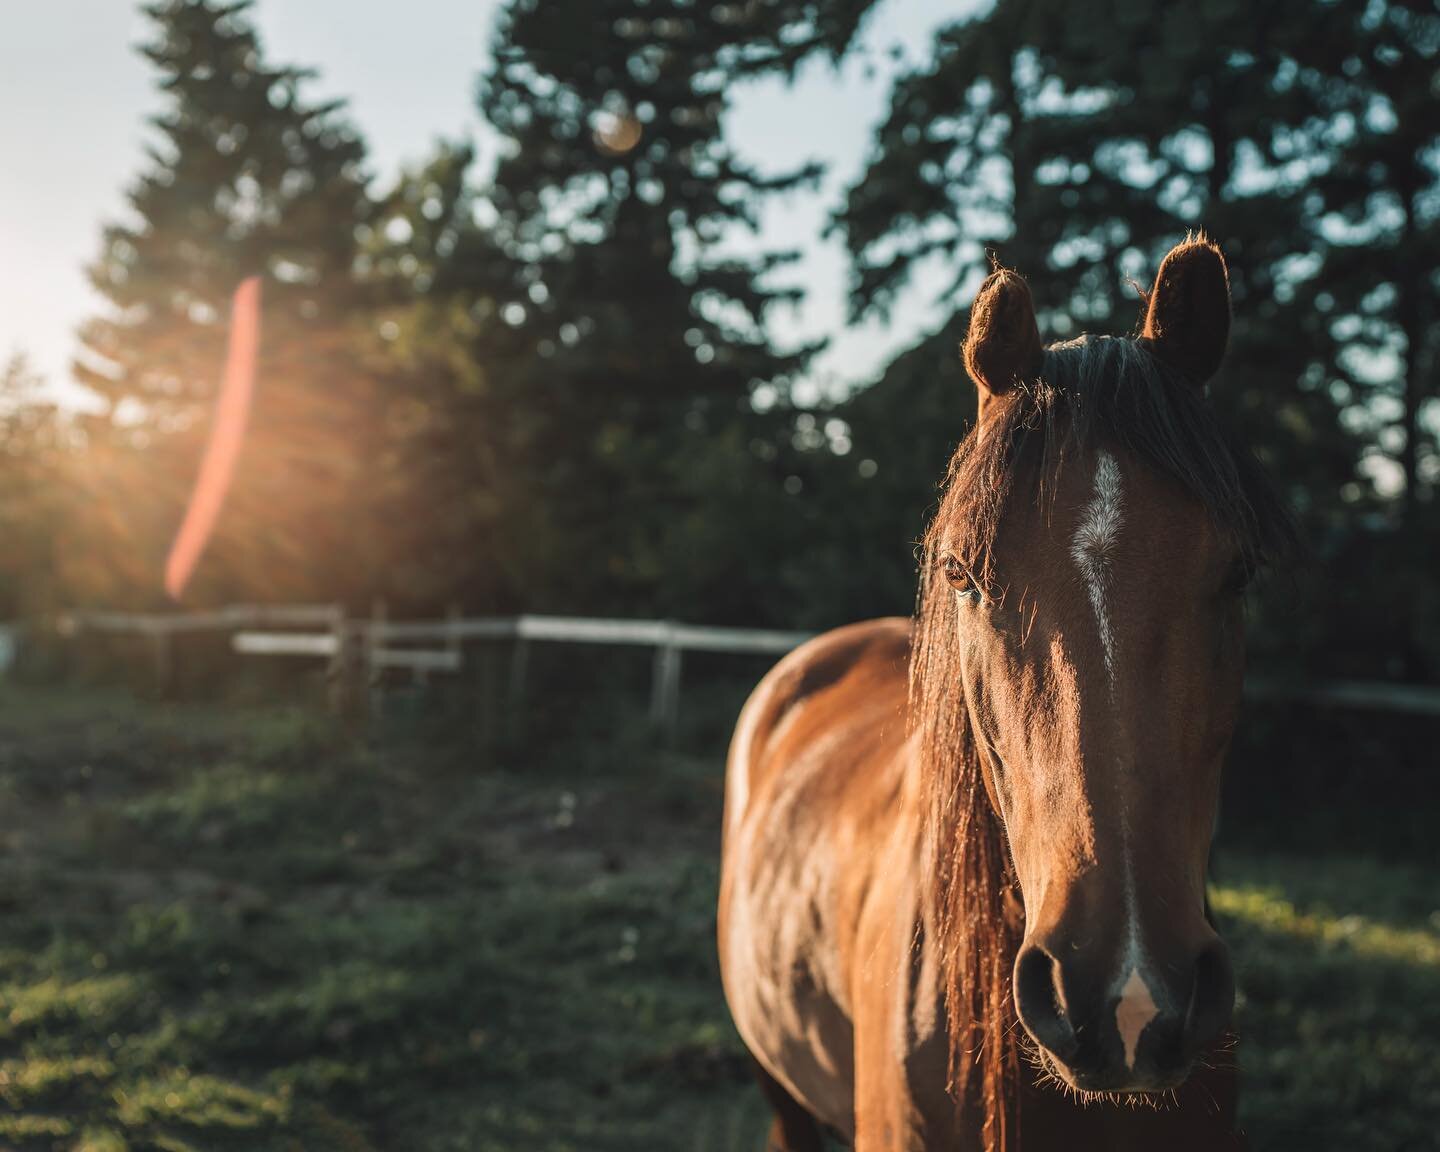 Hi my name is Fran 👋🏻 and I am addicted to glowy sunlight shots!

Seriously though&hellip; how can I not be?! I mean look at it 😍! I vote for lots of contrast with that sun, over evenly lit Images any day of the week.

#yeghorse #yegphotographer #